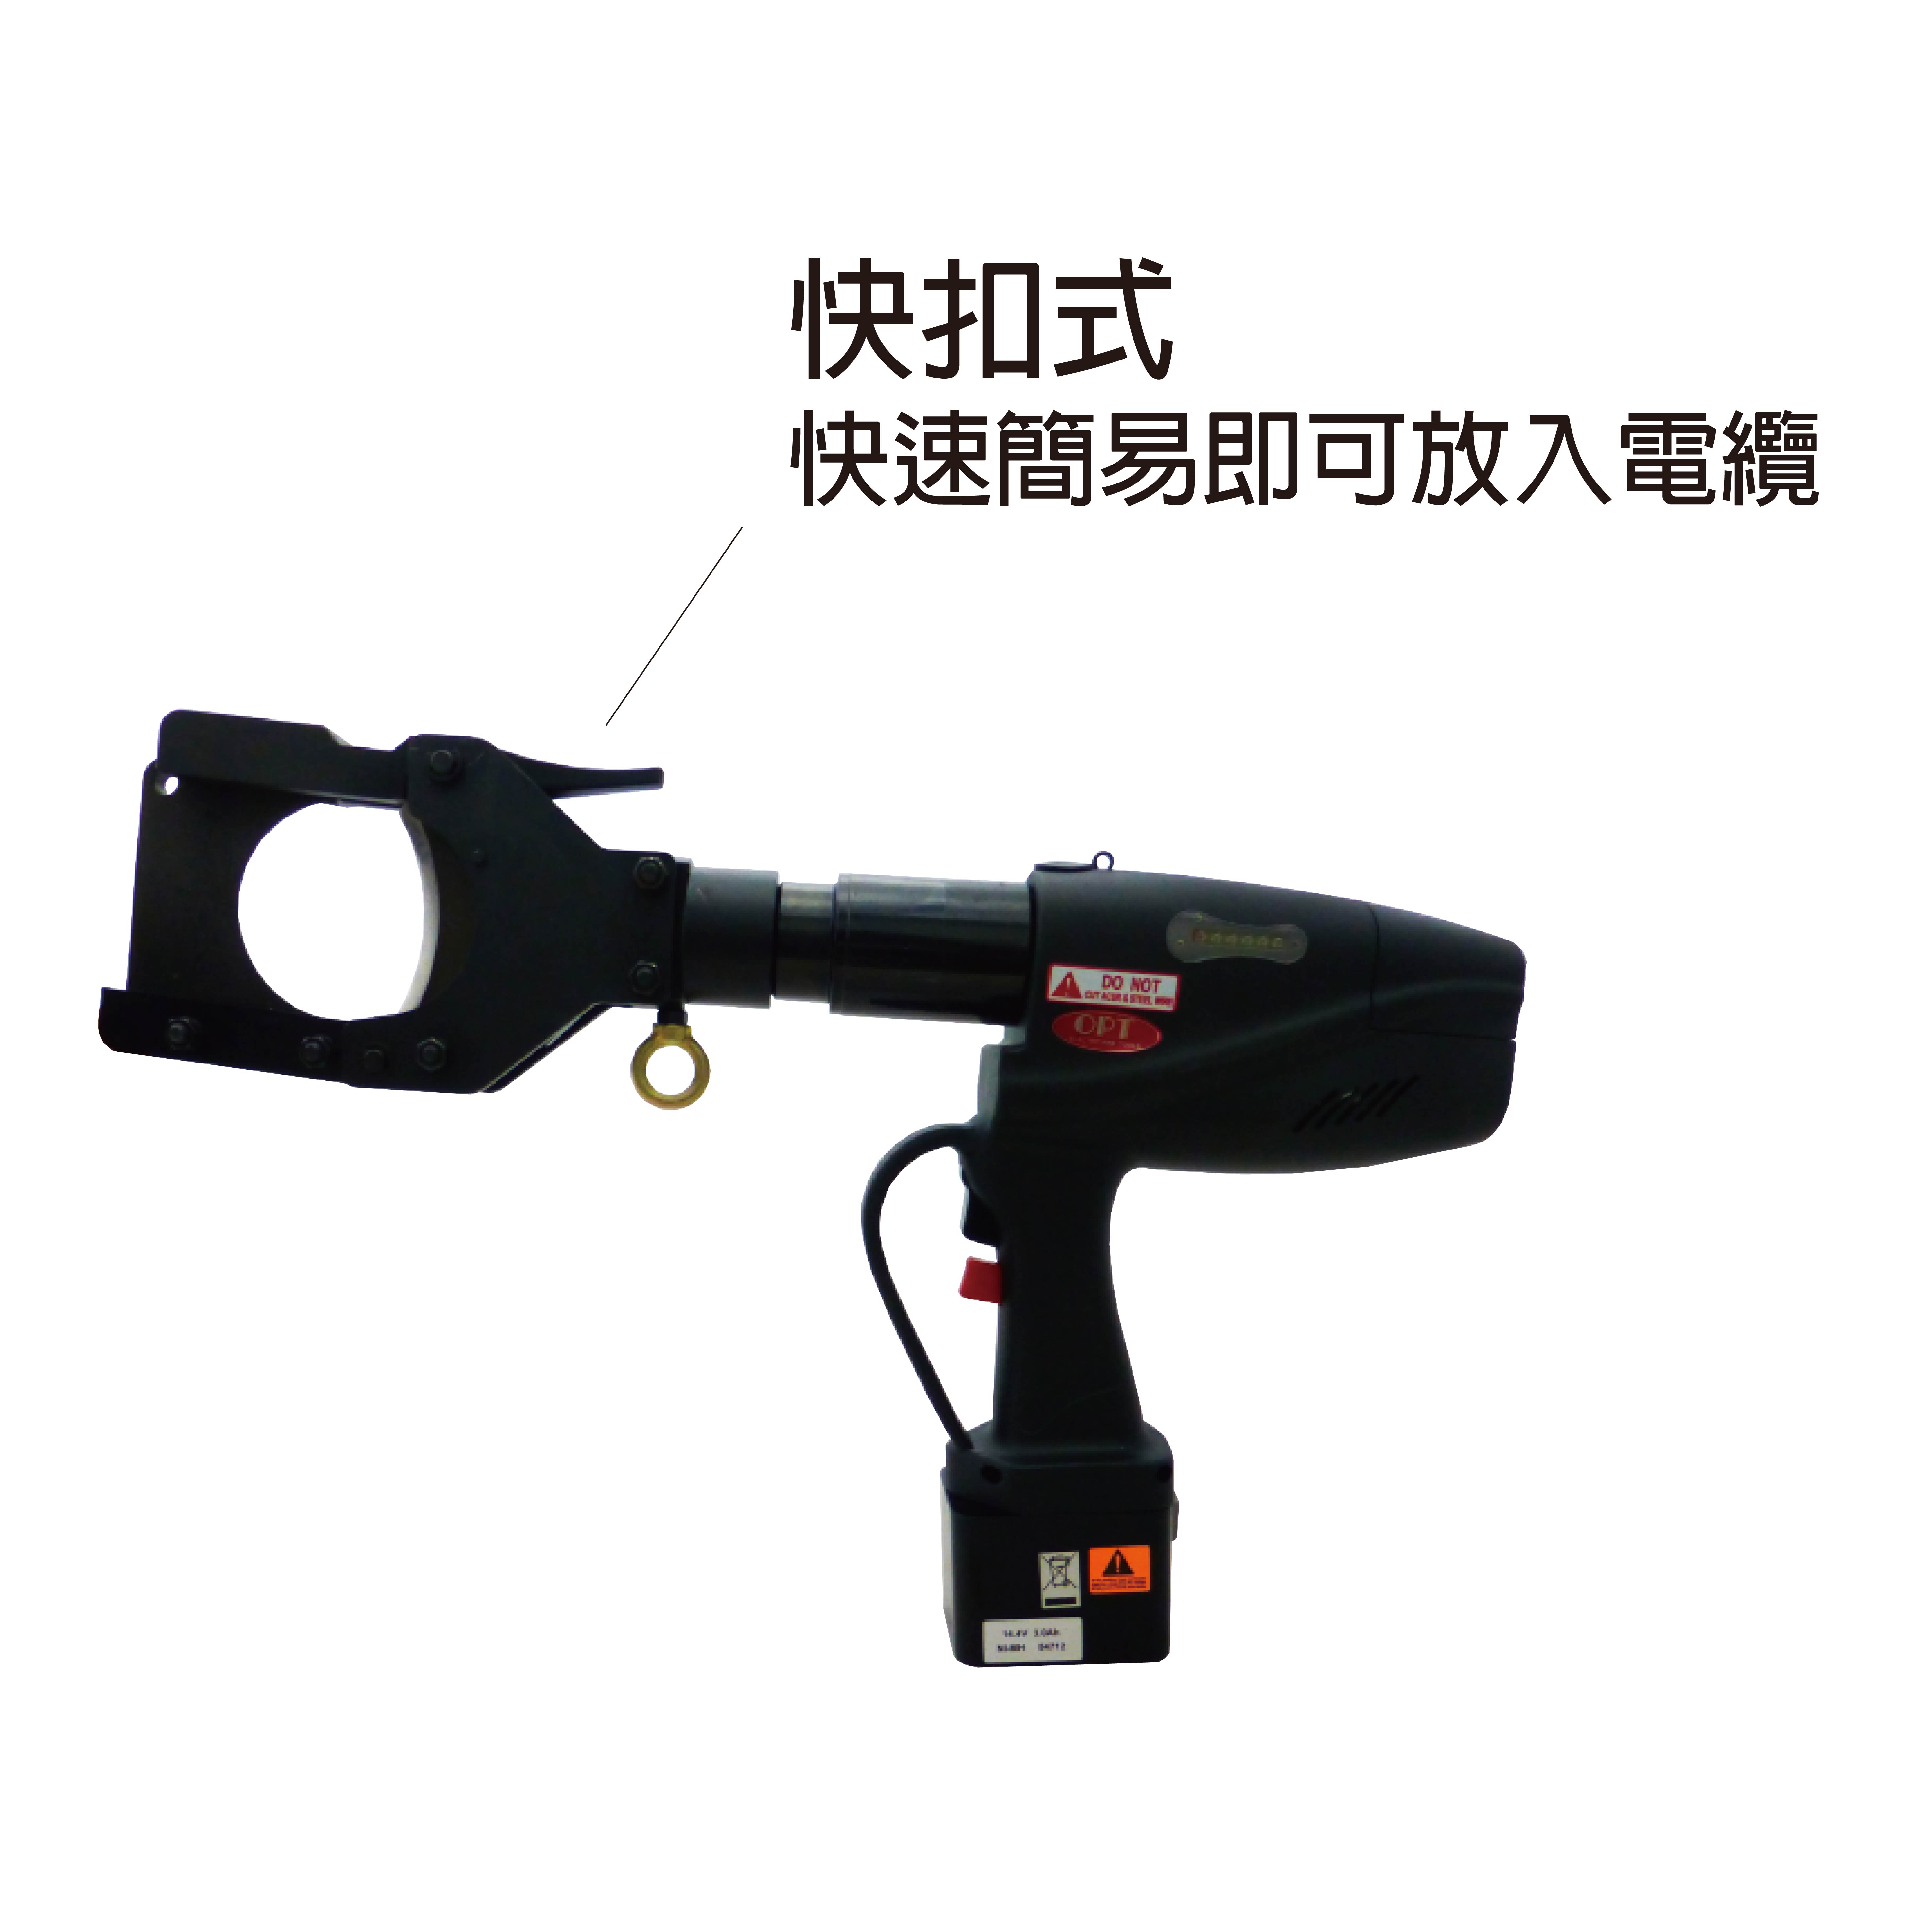 ECL-85S CORDLESS HYDRAULIC CABLE CUTTERS